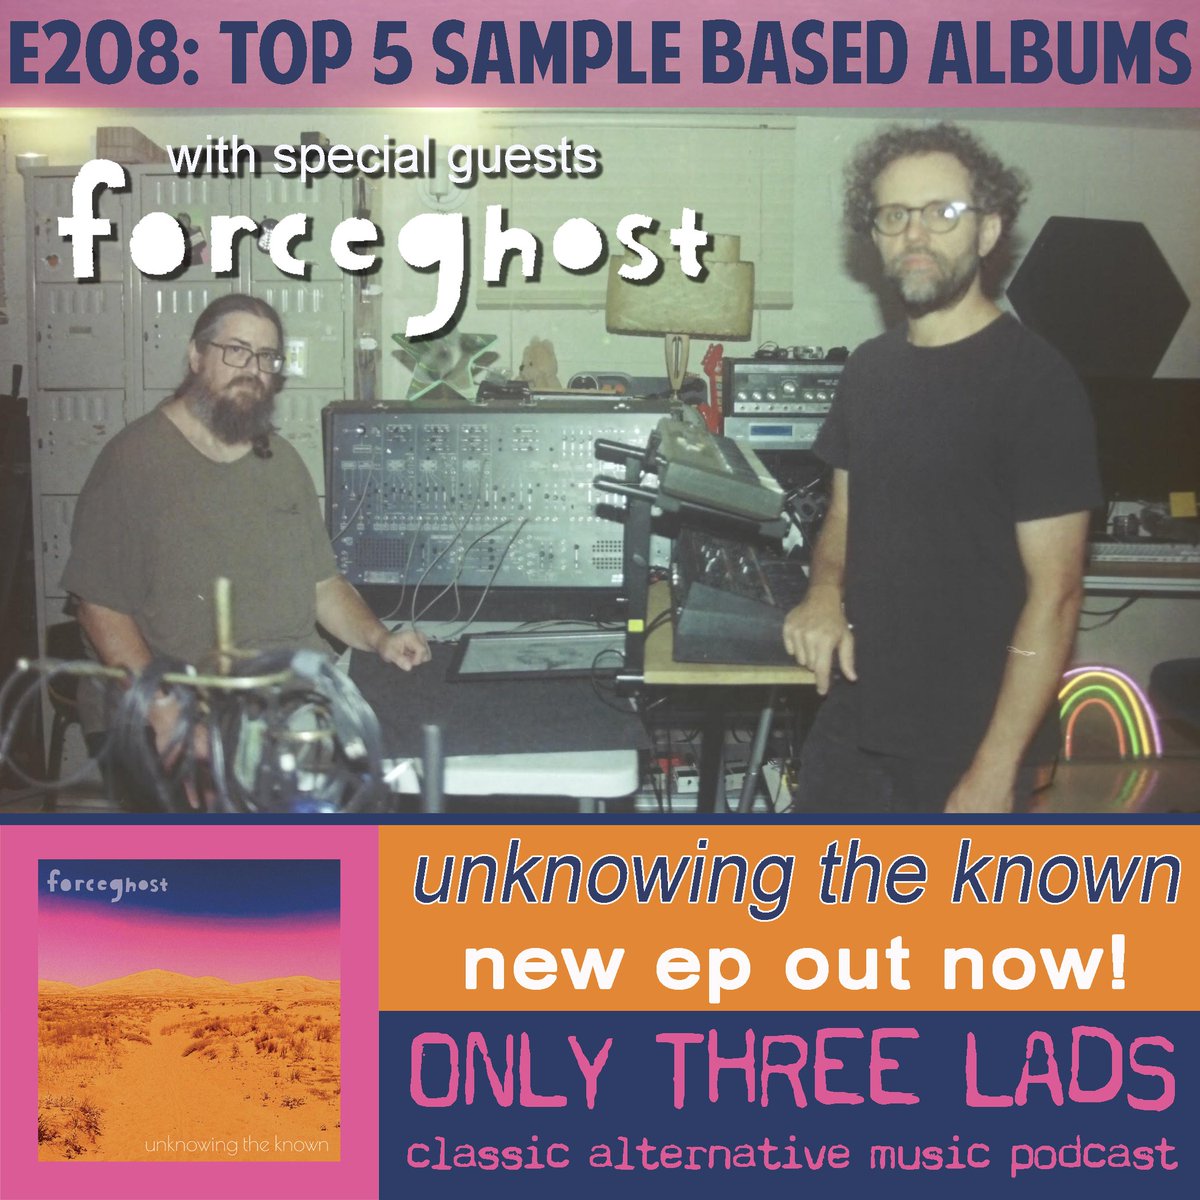 #forceghost stops by for a fun chat on the art of #sampling in all of its various forms. Their new EP unknowing the known is out now! onlythreelads.com @ctpublicity @PantheonPods #newwave #diymusic #indiepop #indierock #synthpop #electronicmusic #hiphop